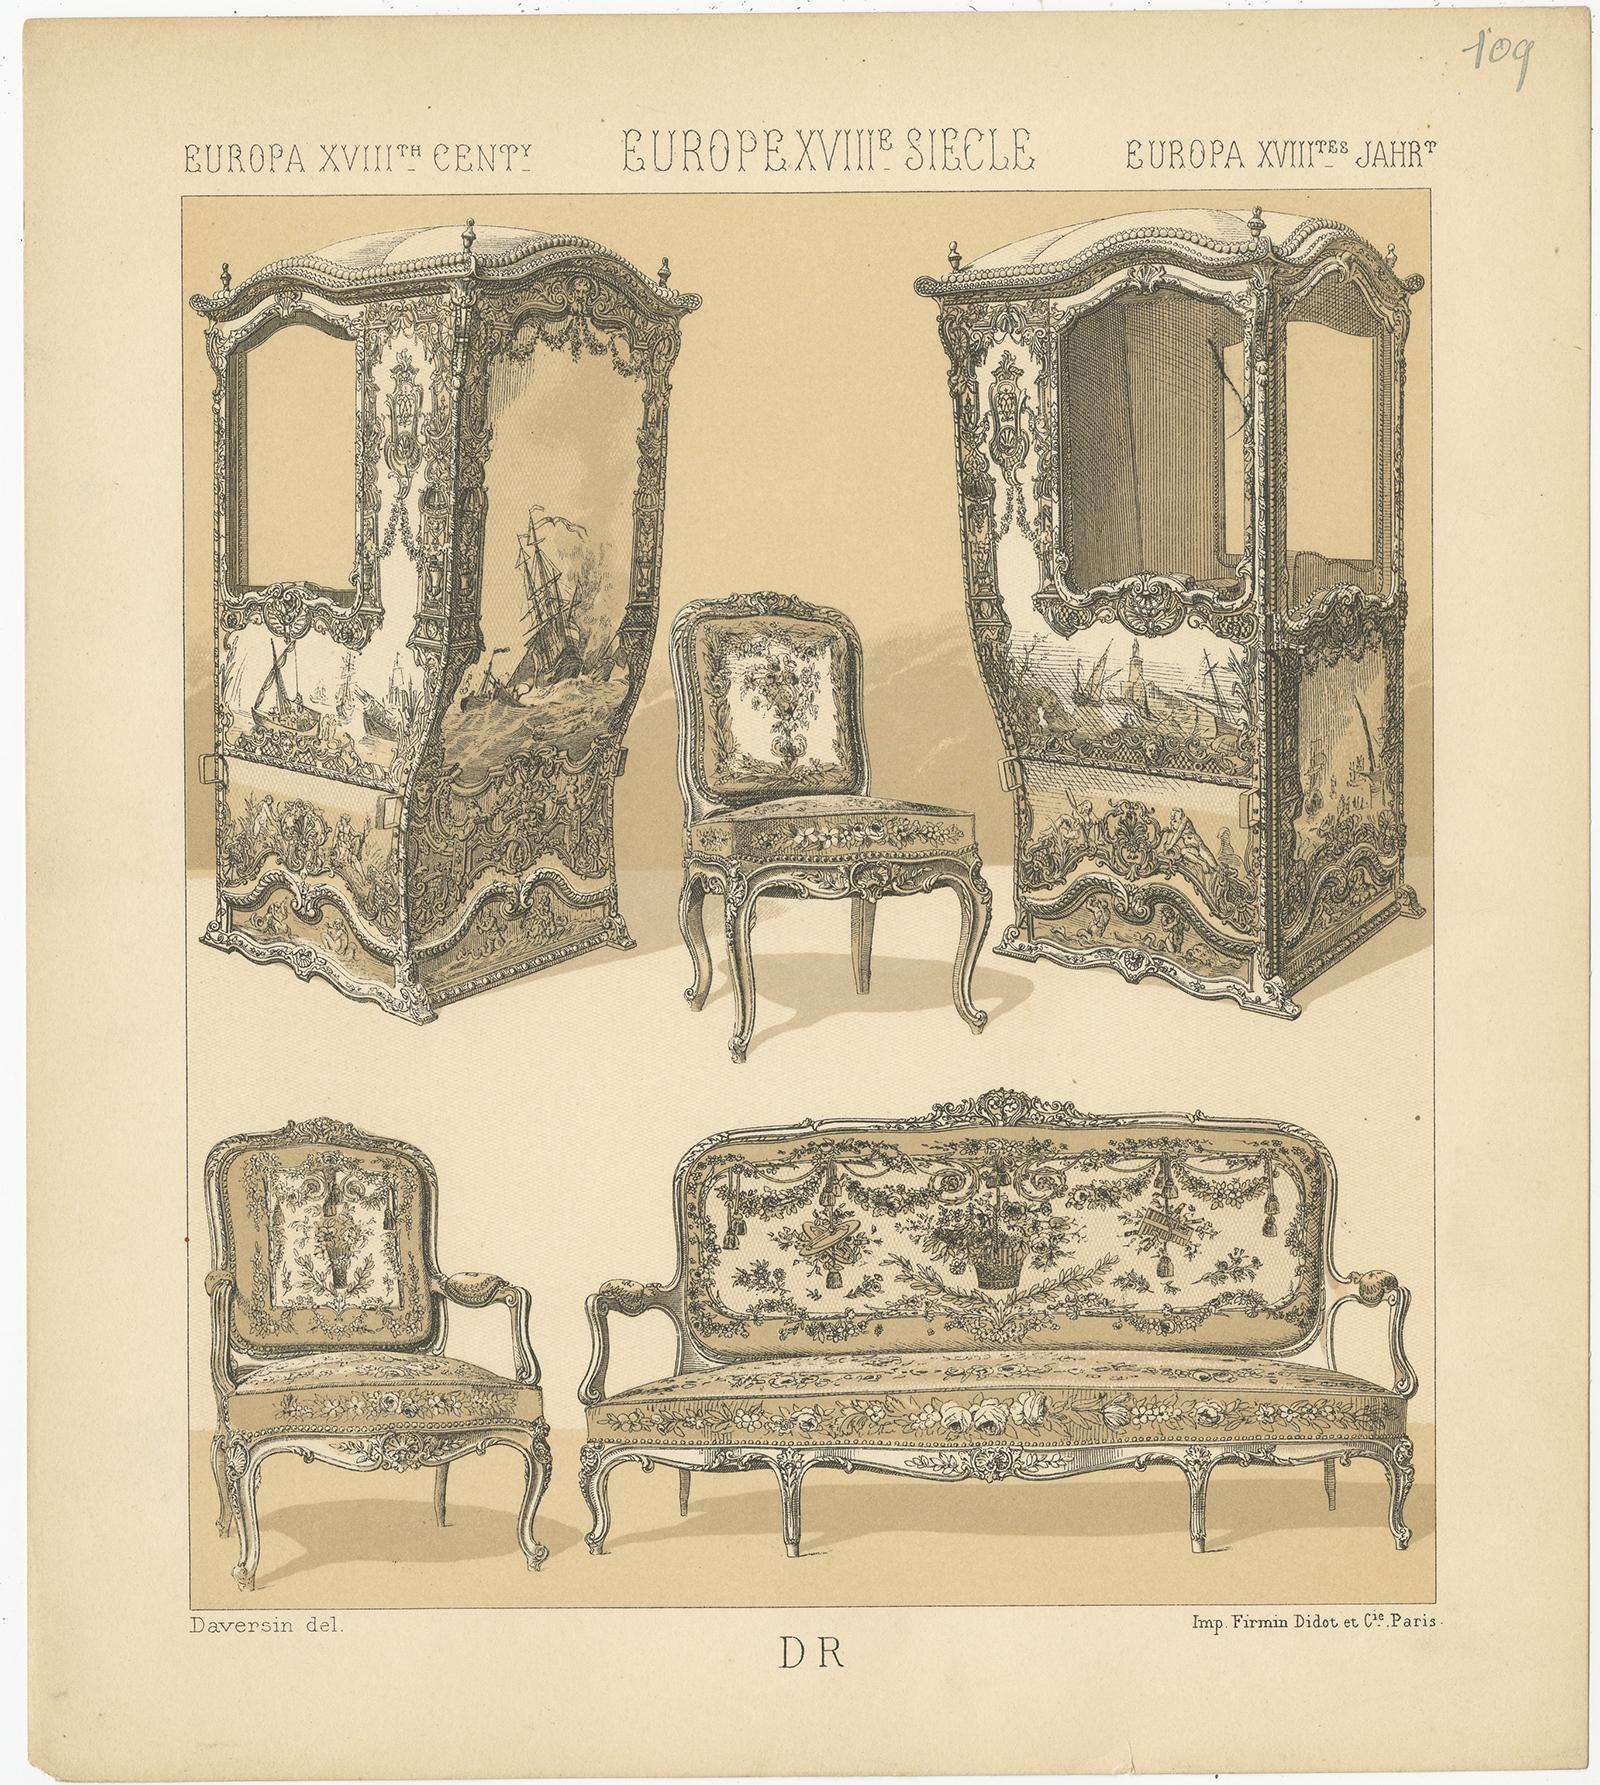 19th Century Pl. 109 Antique Print of European XVIIIth Century Furniture by Racinet For Sale